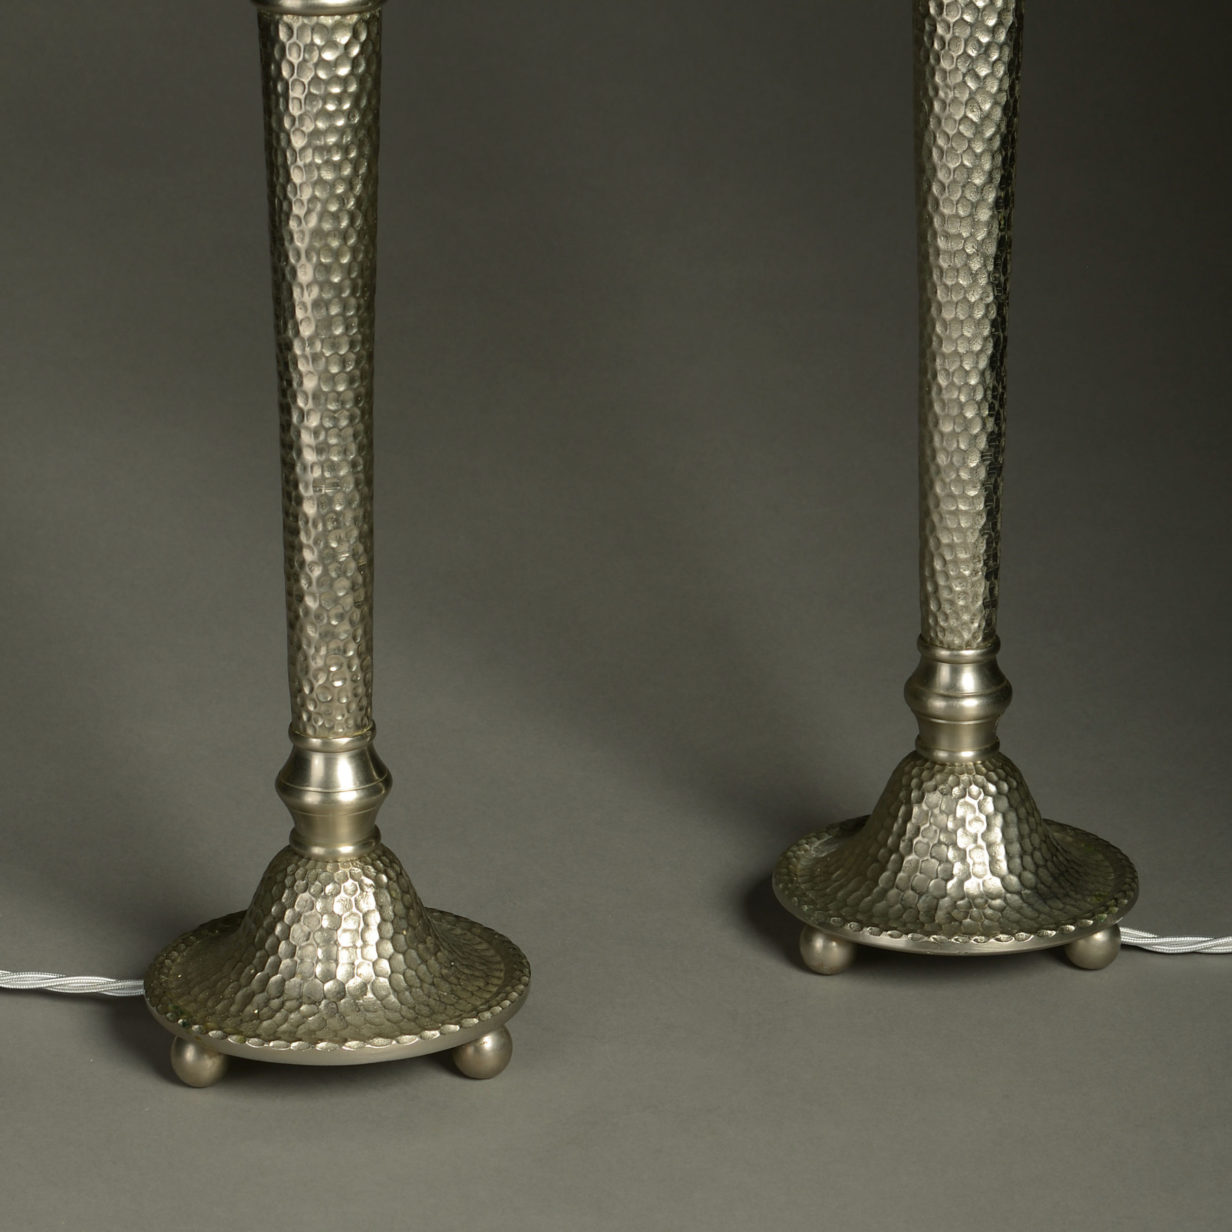 A pair of mid-century hammered steel torch lamps